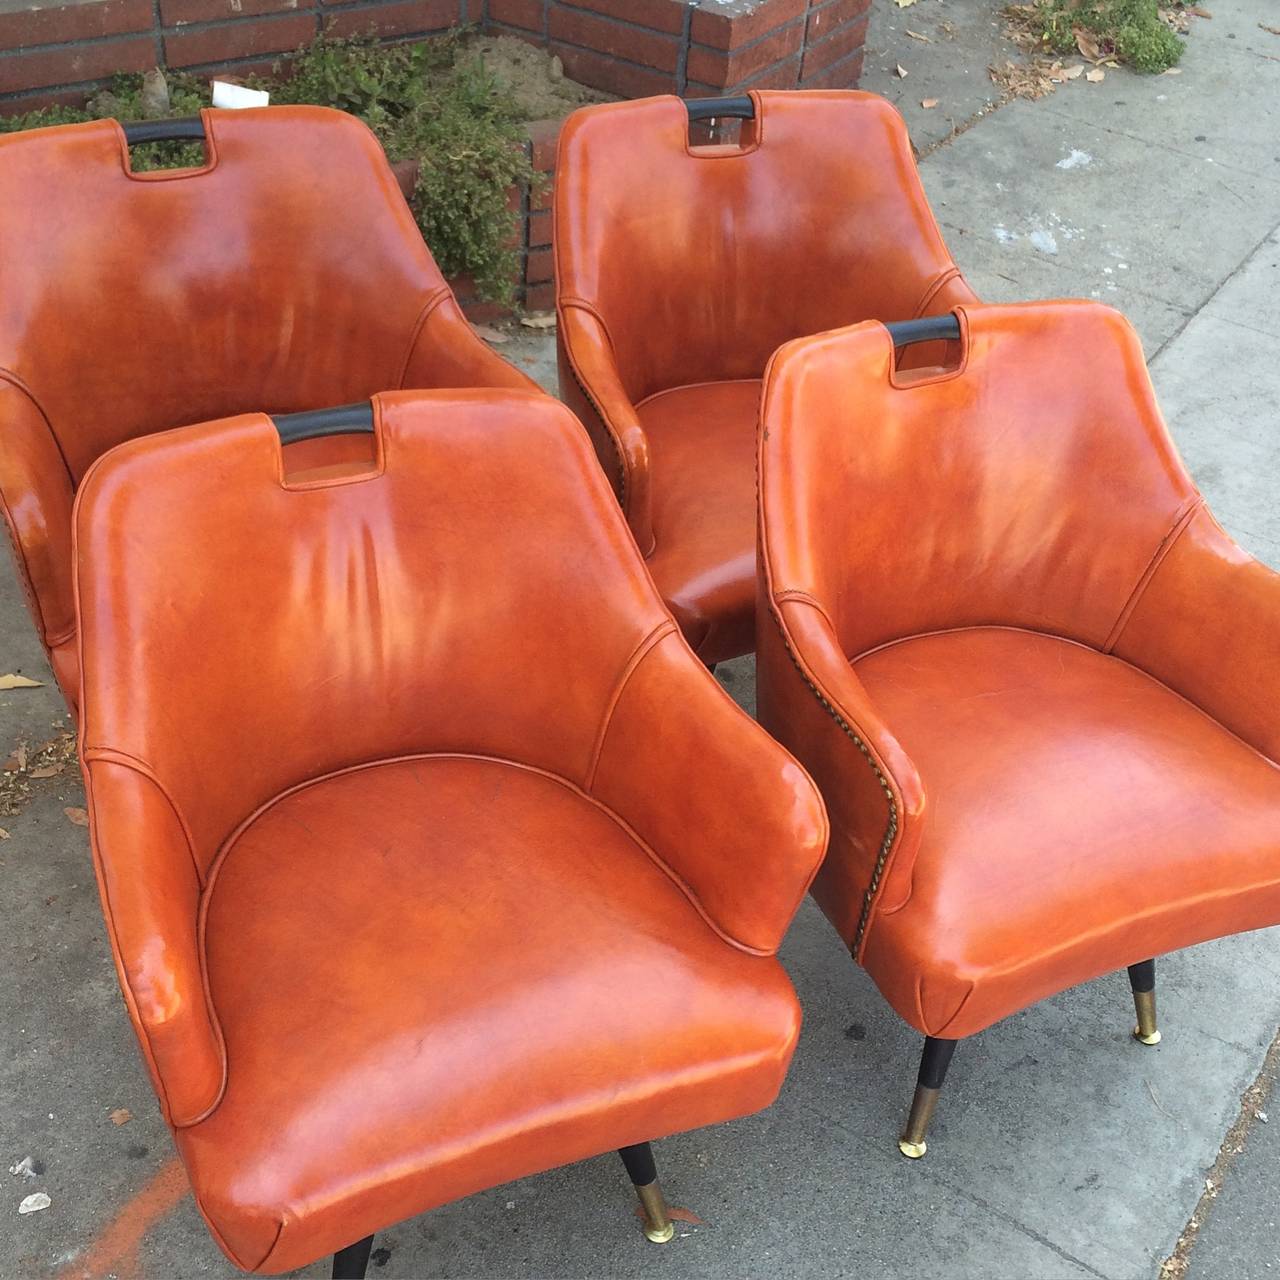 Four leather games chairs. Unique smaller base and legs carry the four orange game table chairs with wooden pull at top very nice and comfy.